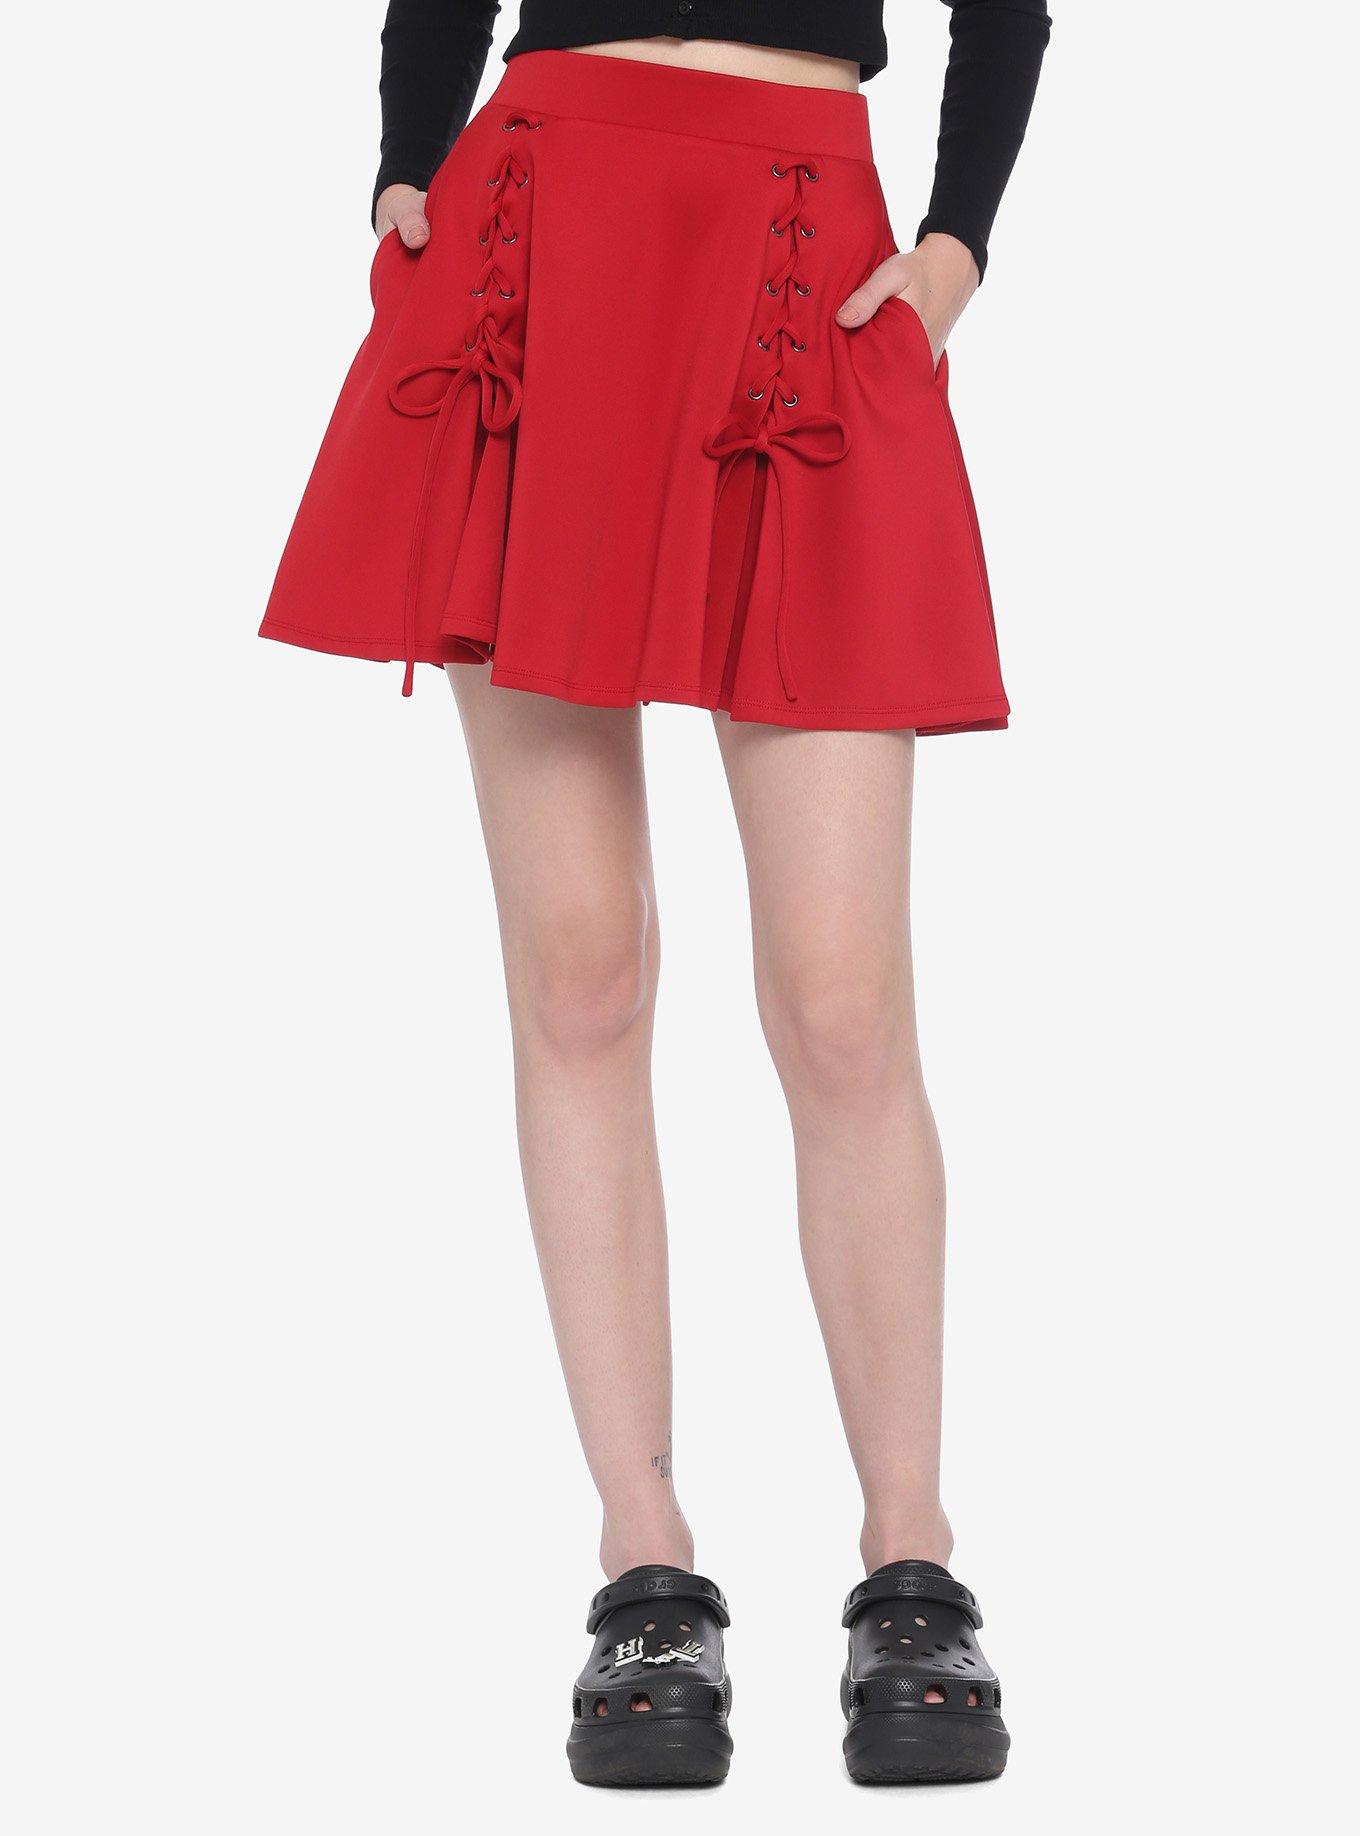 Red Lace-Up Skater Skirt, RED, hi-res